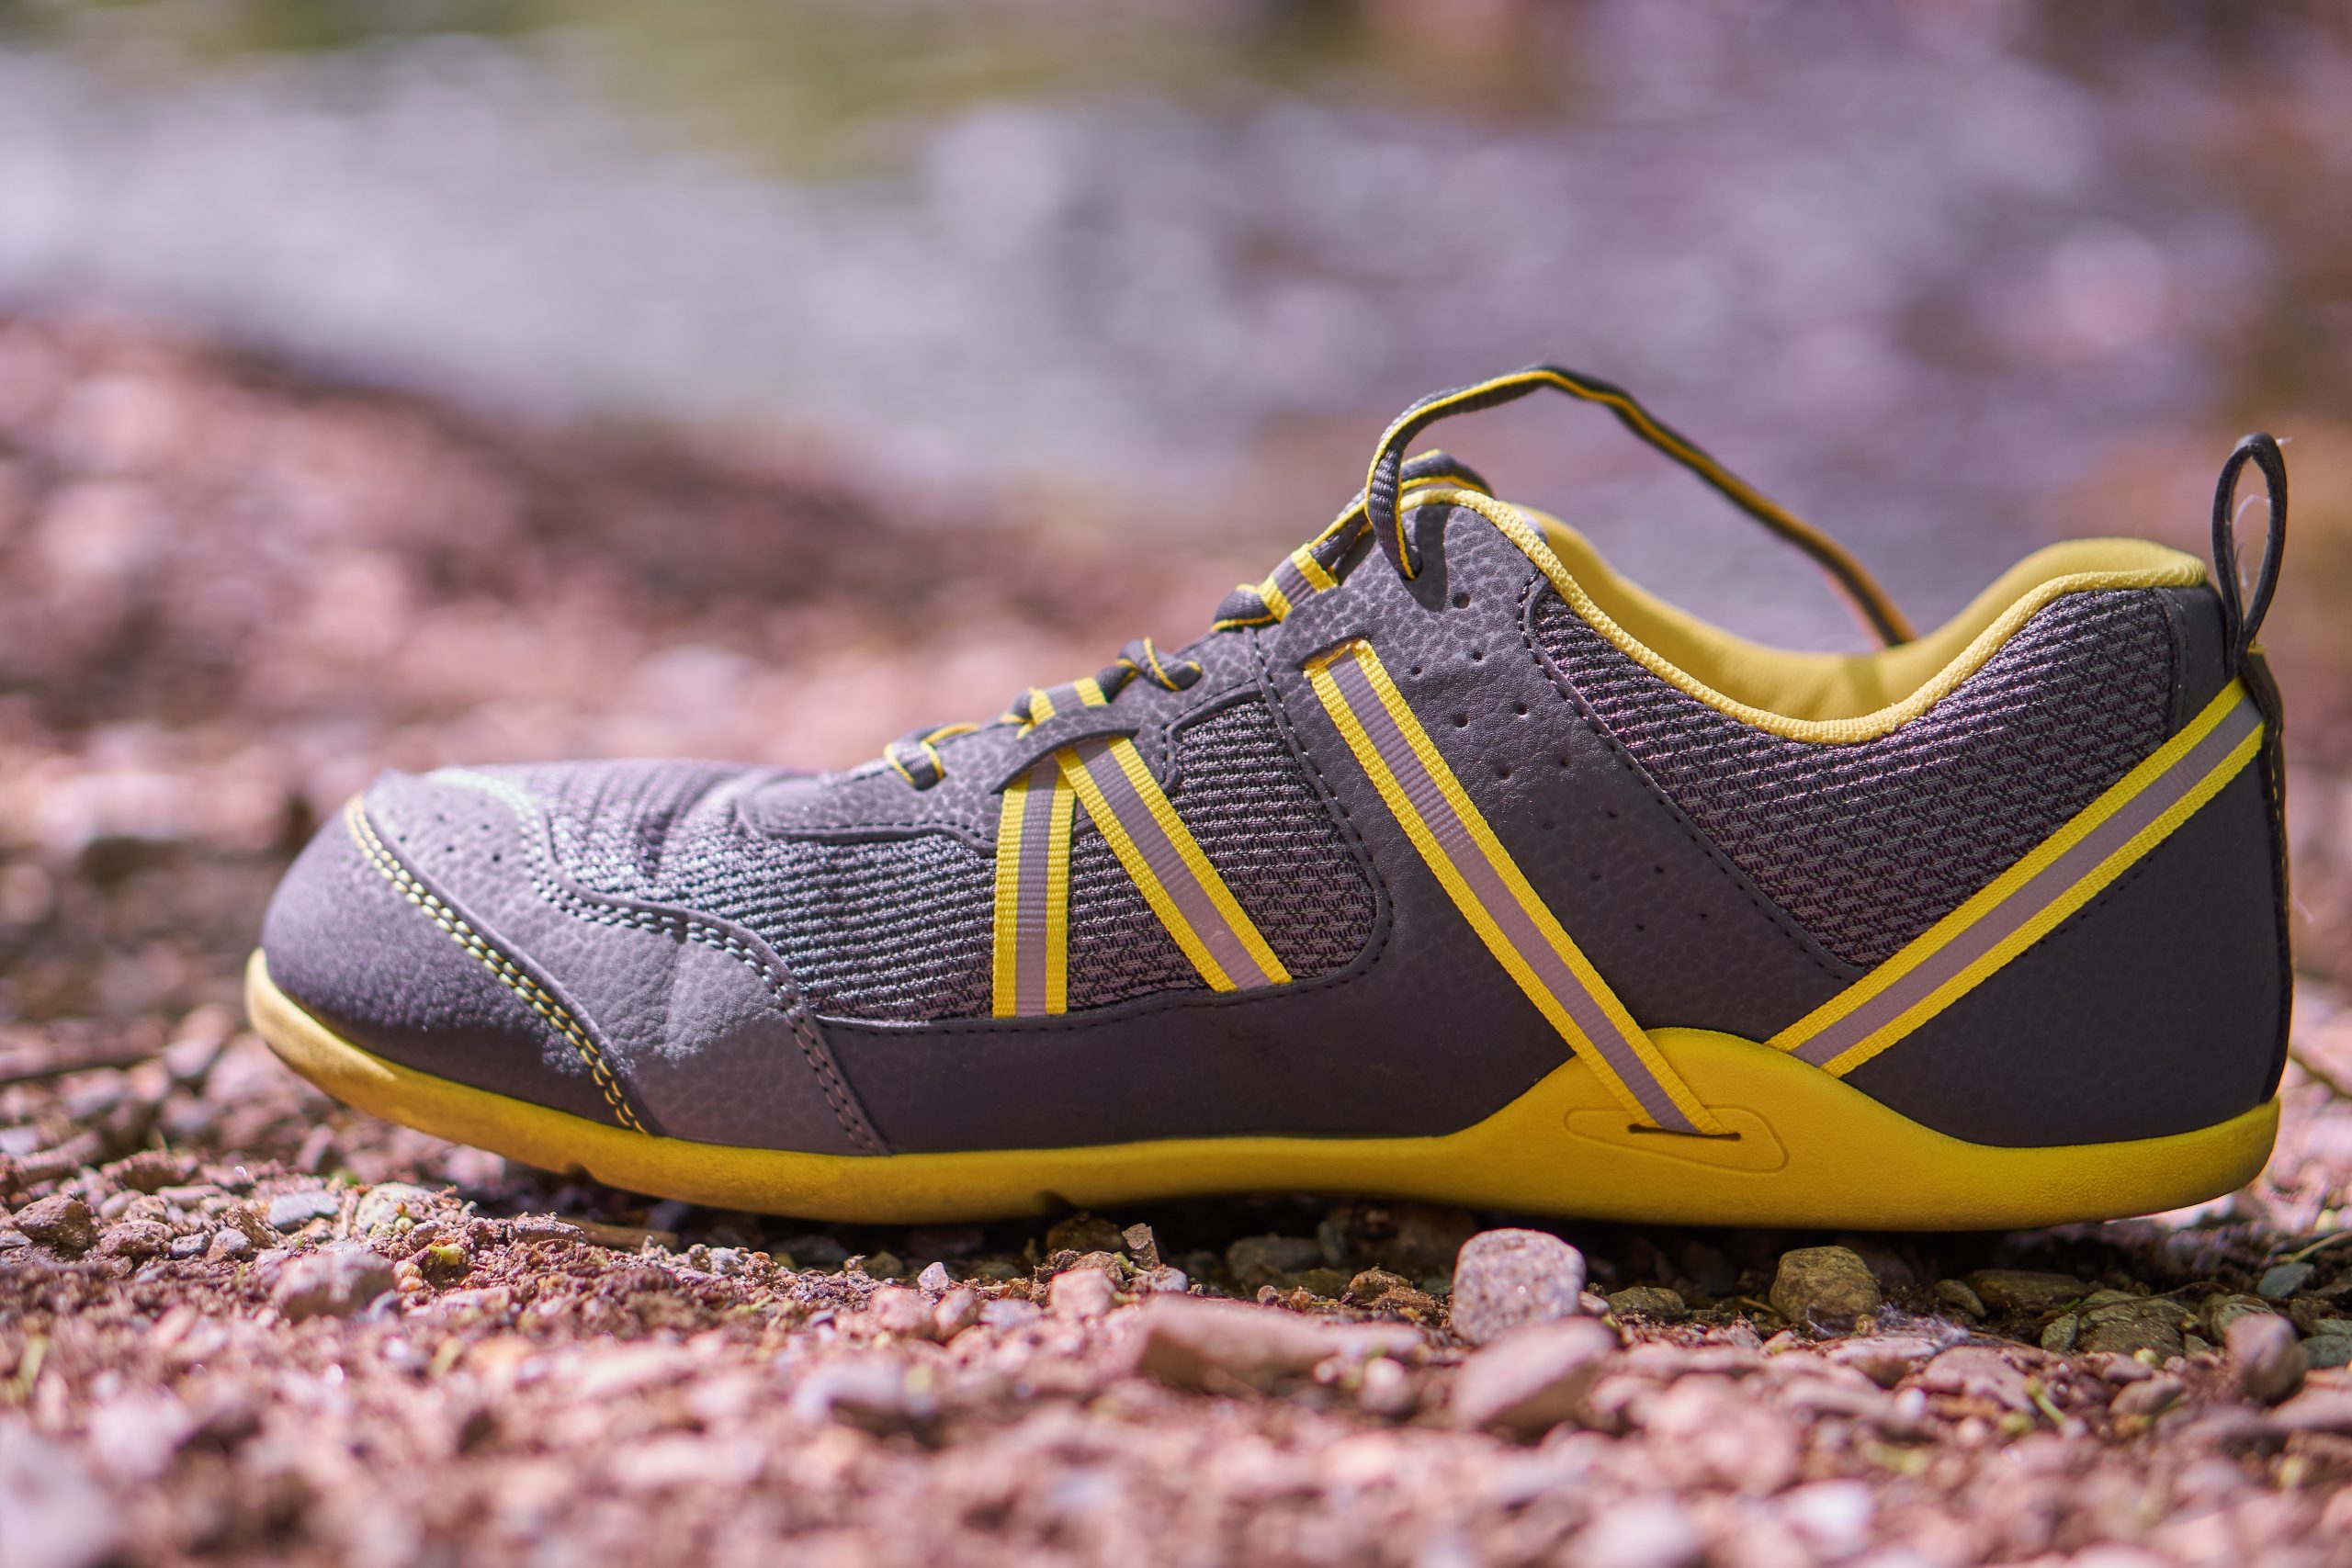 Xero Shoes Prio Running Shoe Review - Birthday Shoes - Toe Shoes